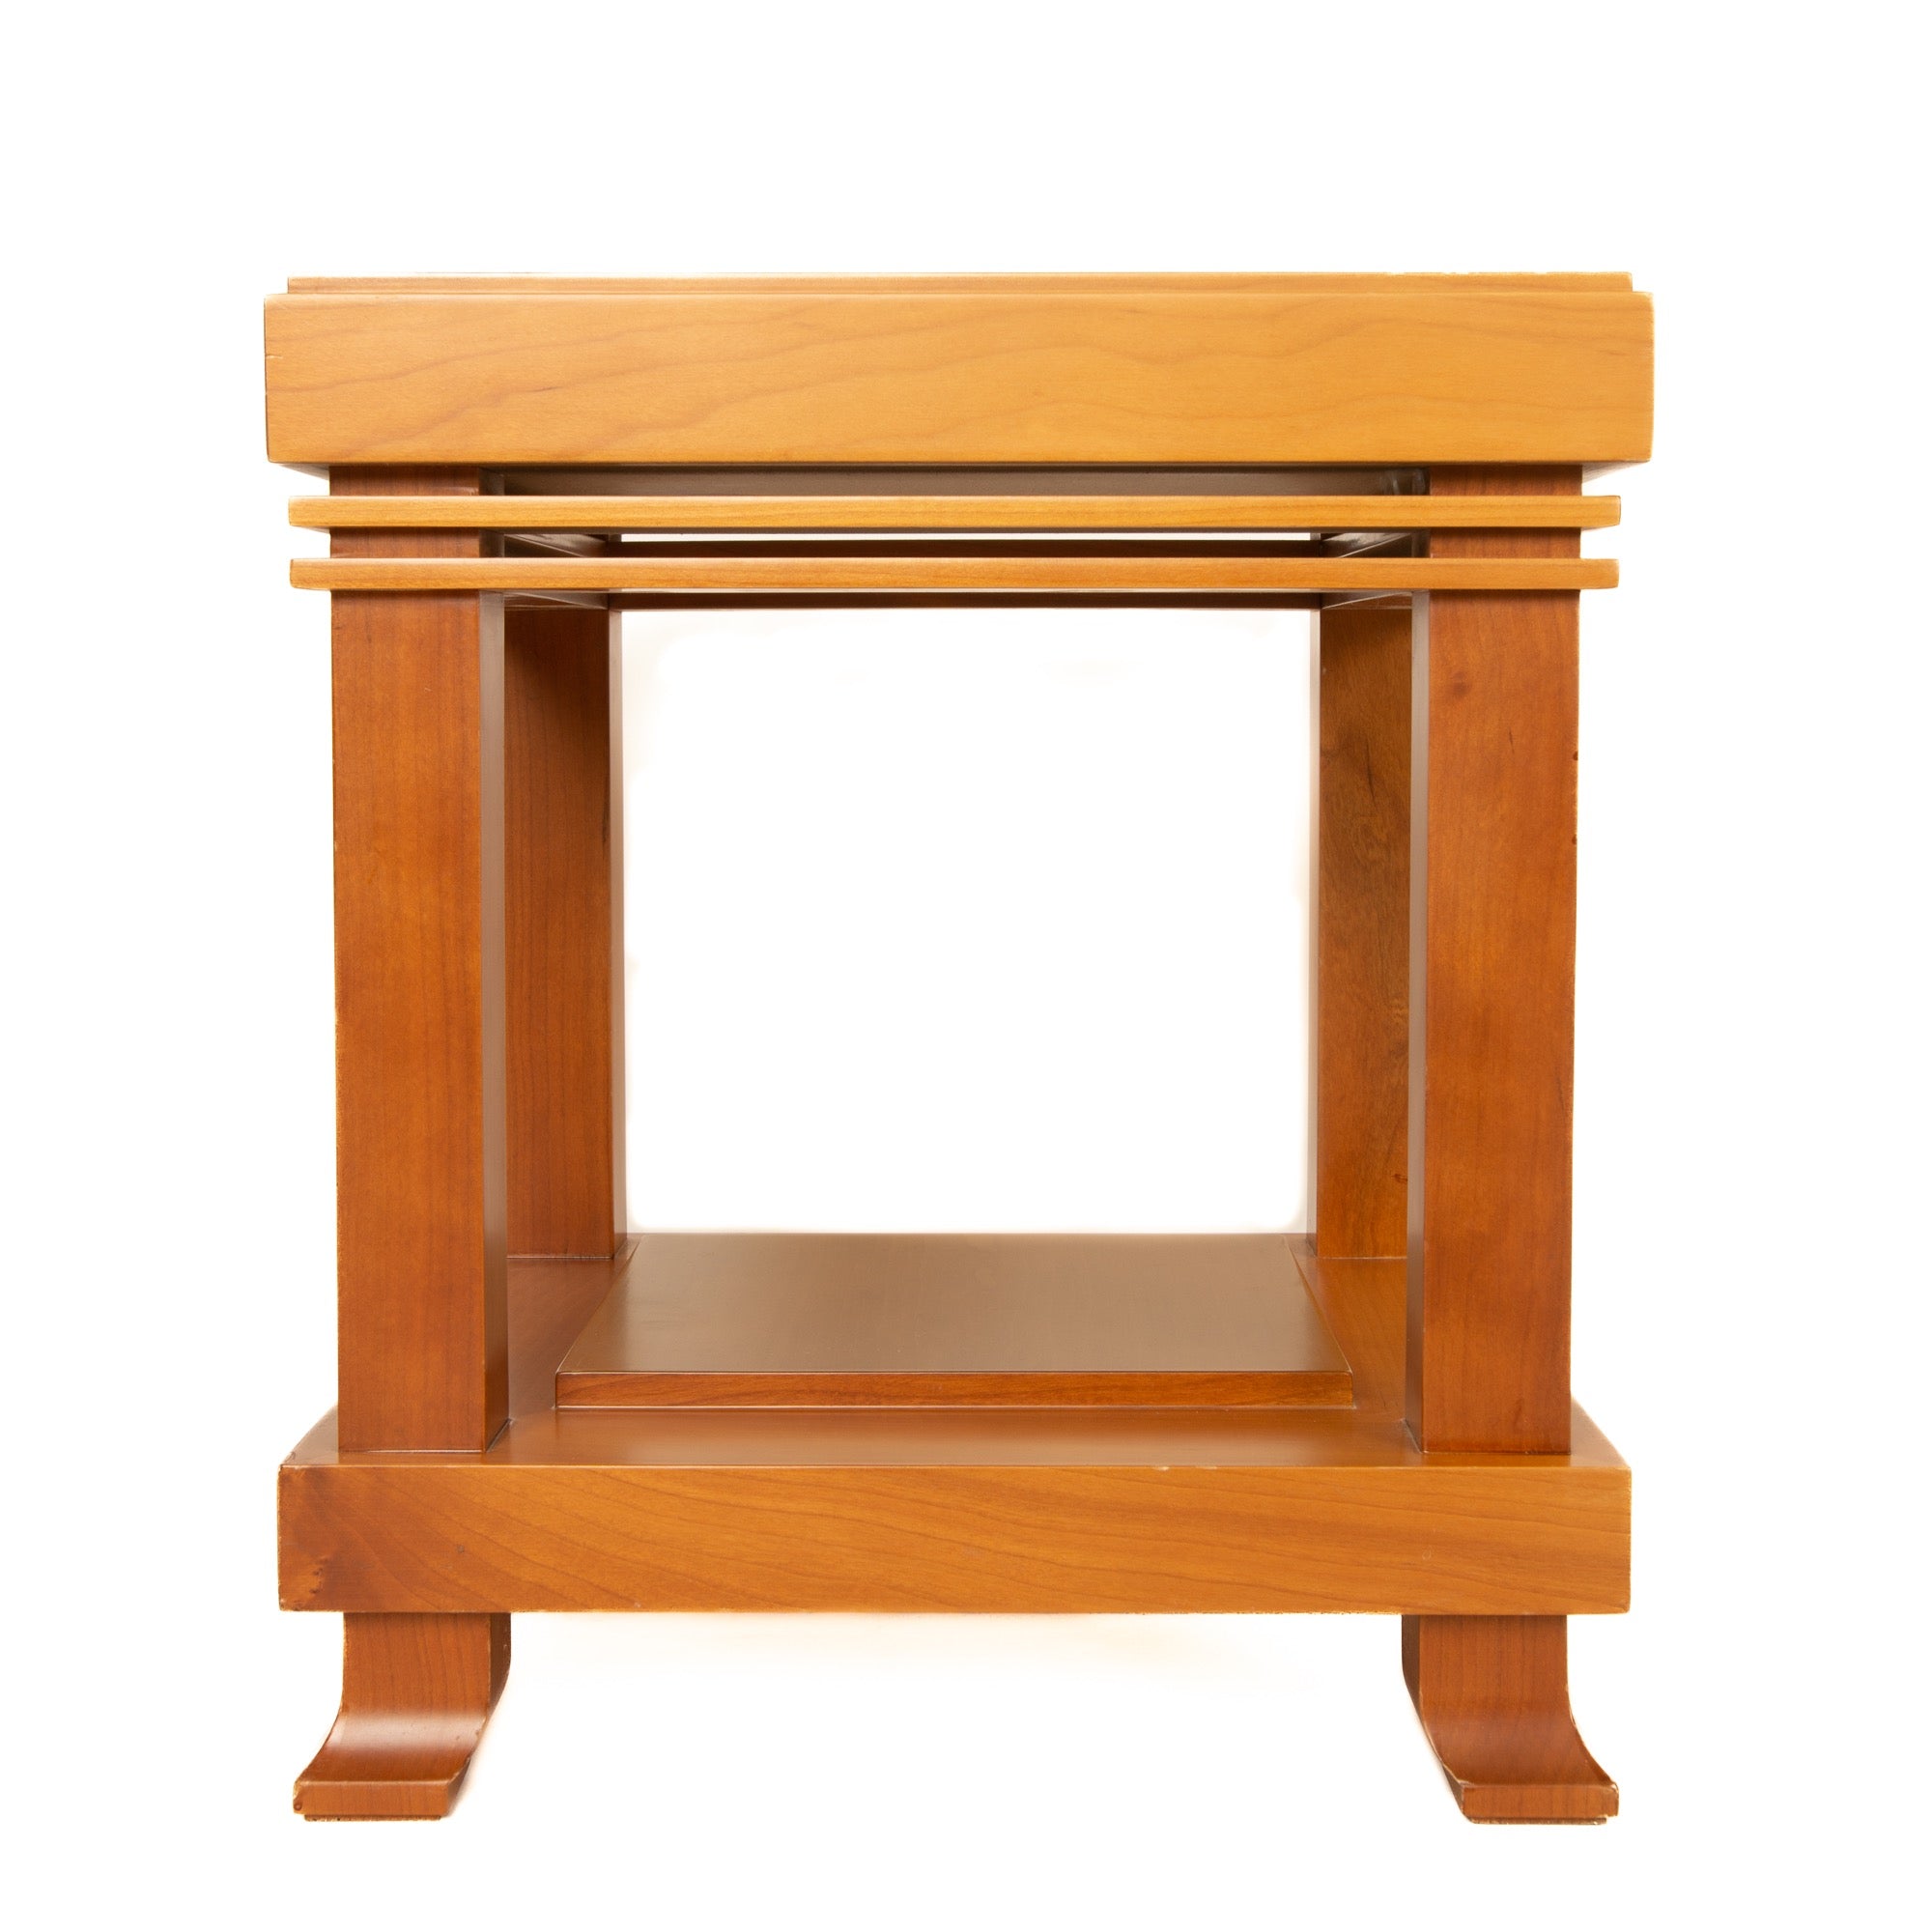 FLW 'Robie' House Side Table by Frank Lloyd Wright for Cassina, 1908